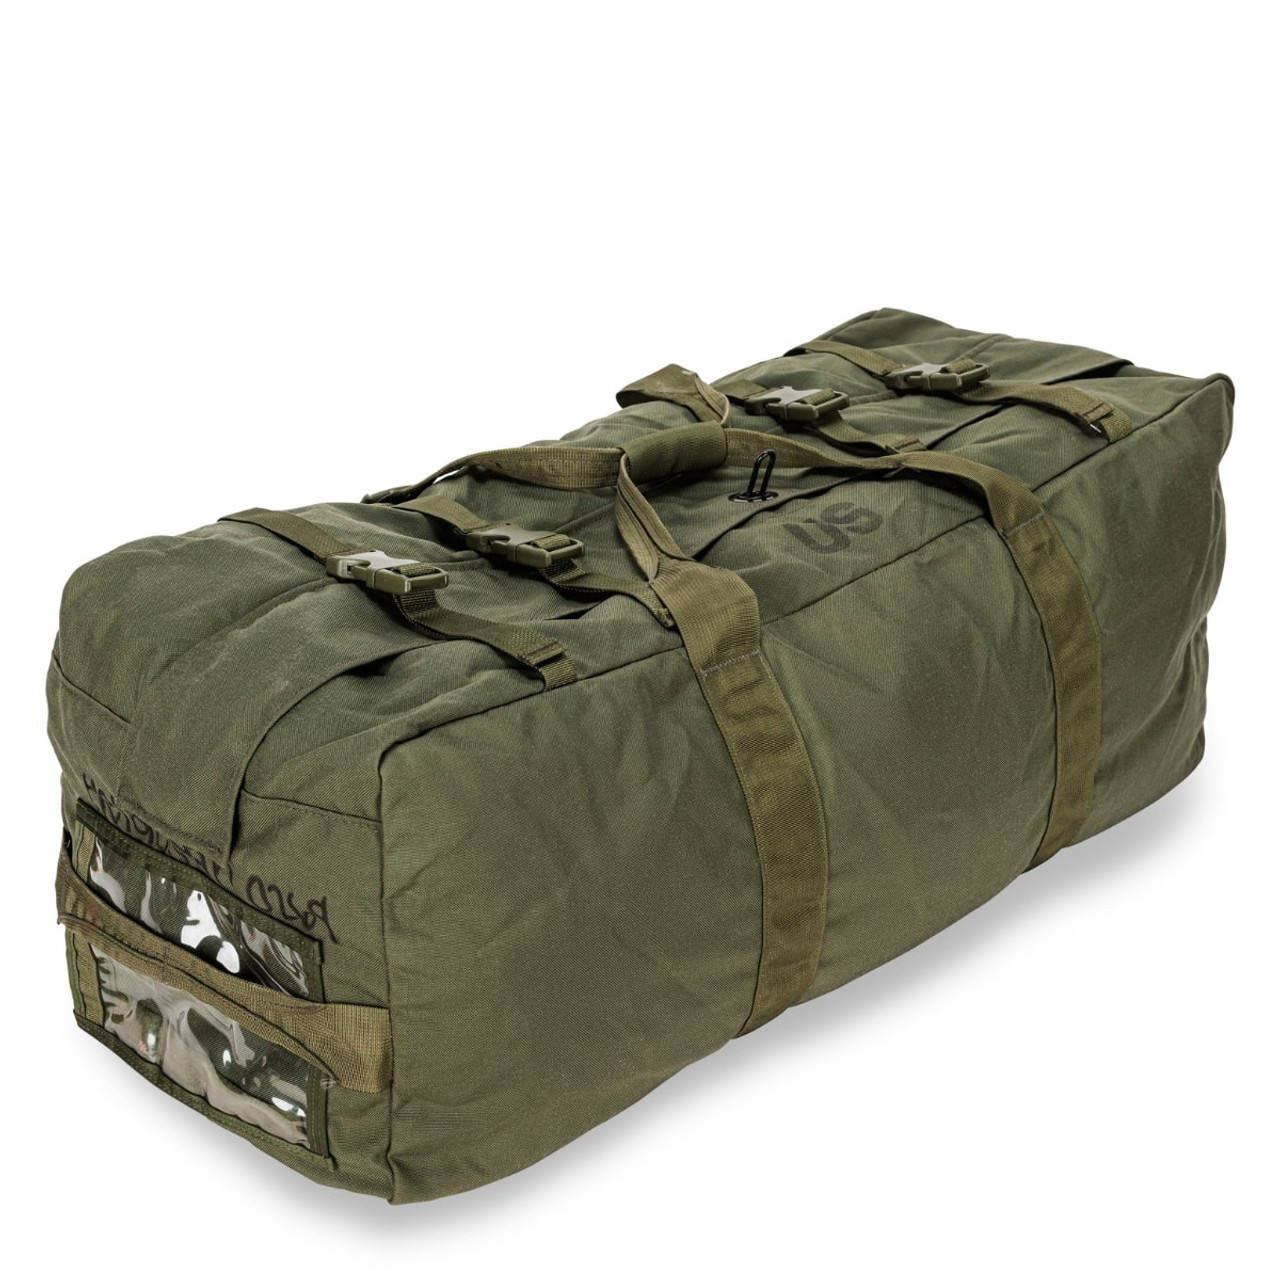 NEW USA Made Army Military Duffle Bag Sea Bag OD Green Top Load Shoulder  Straps